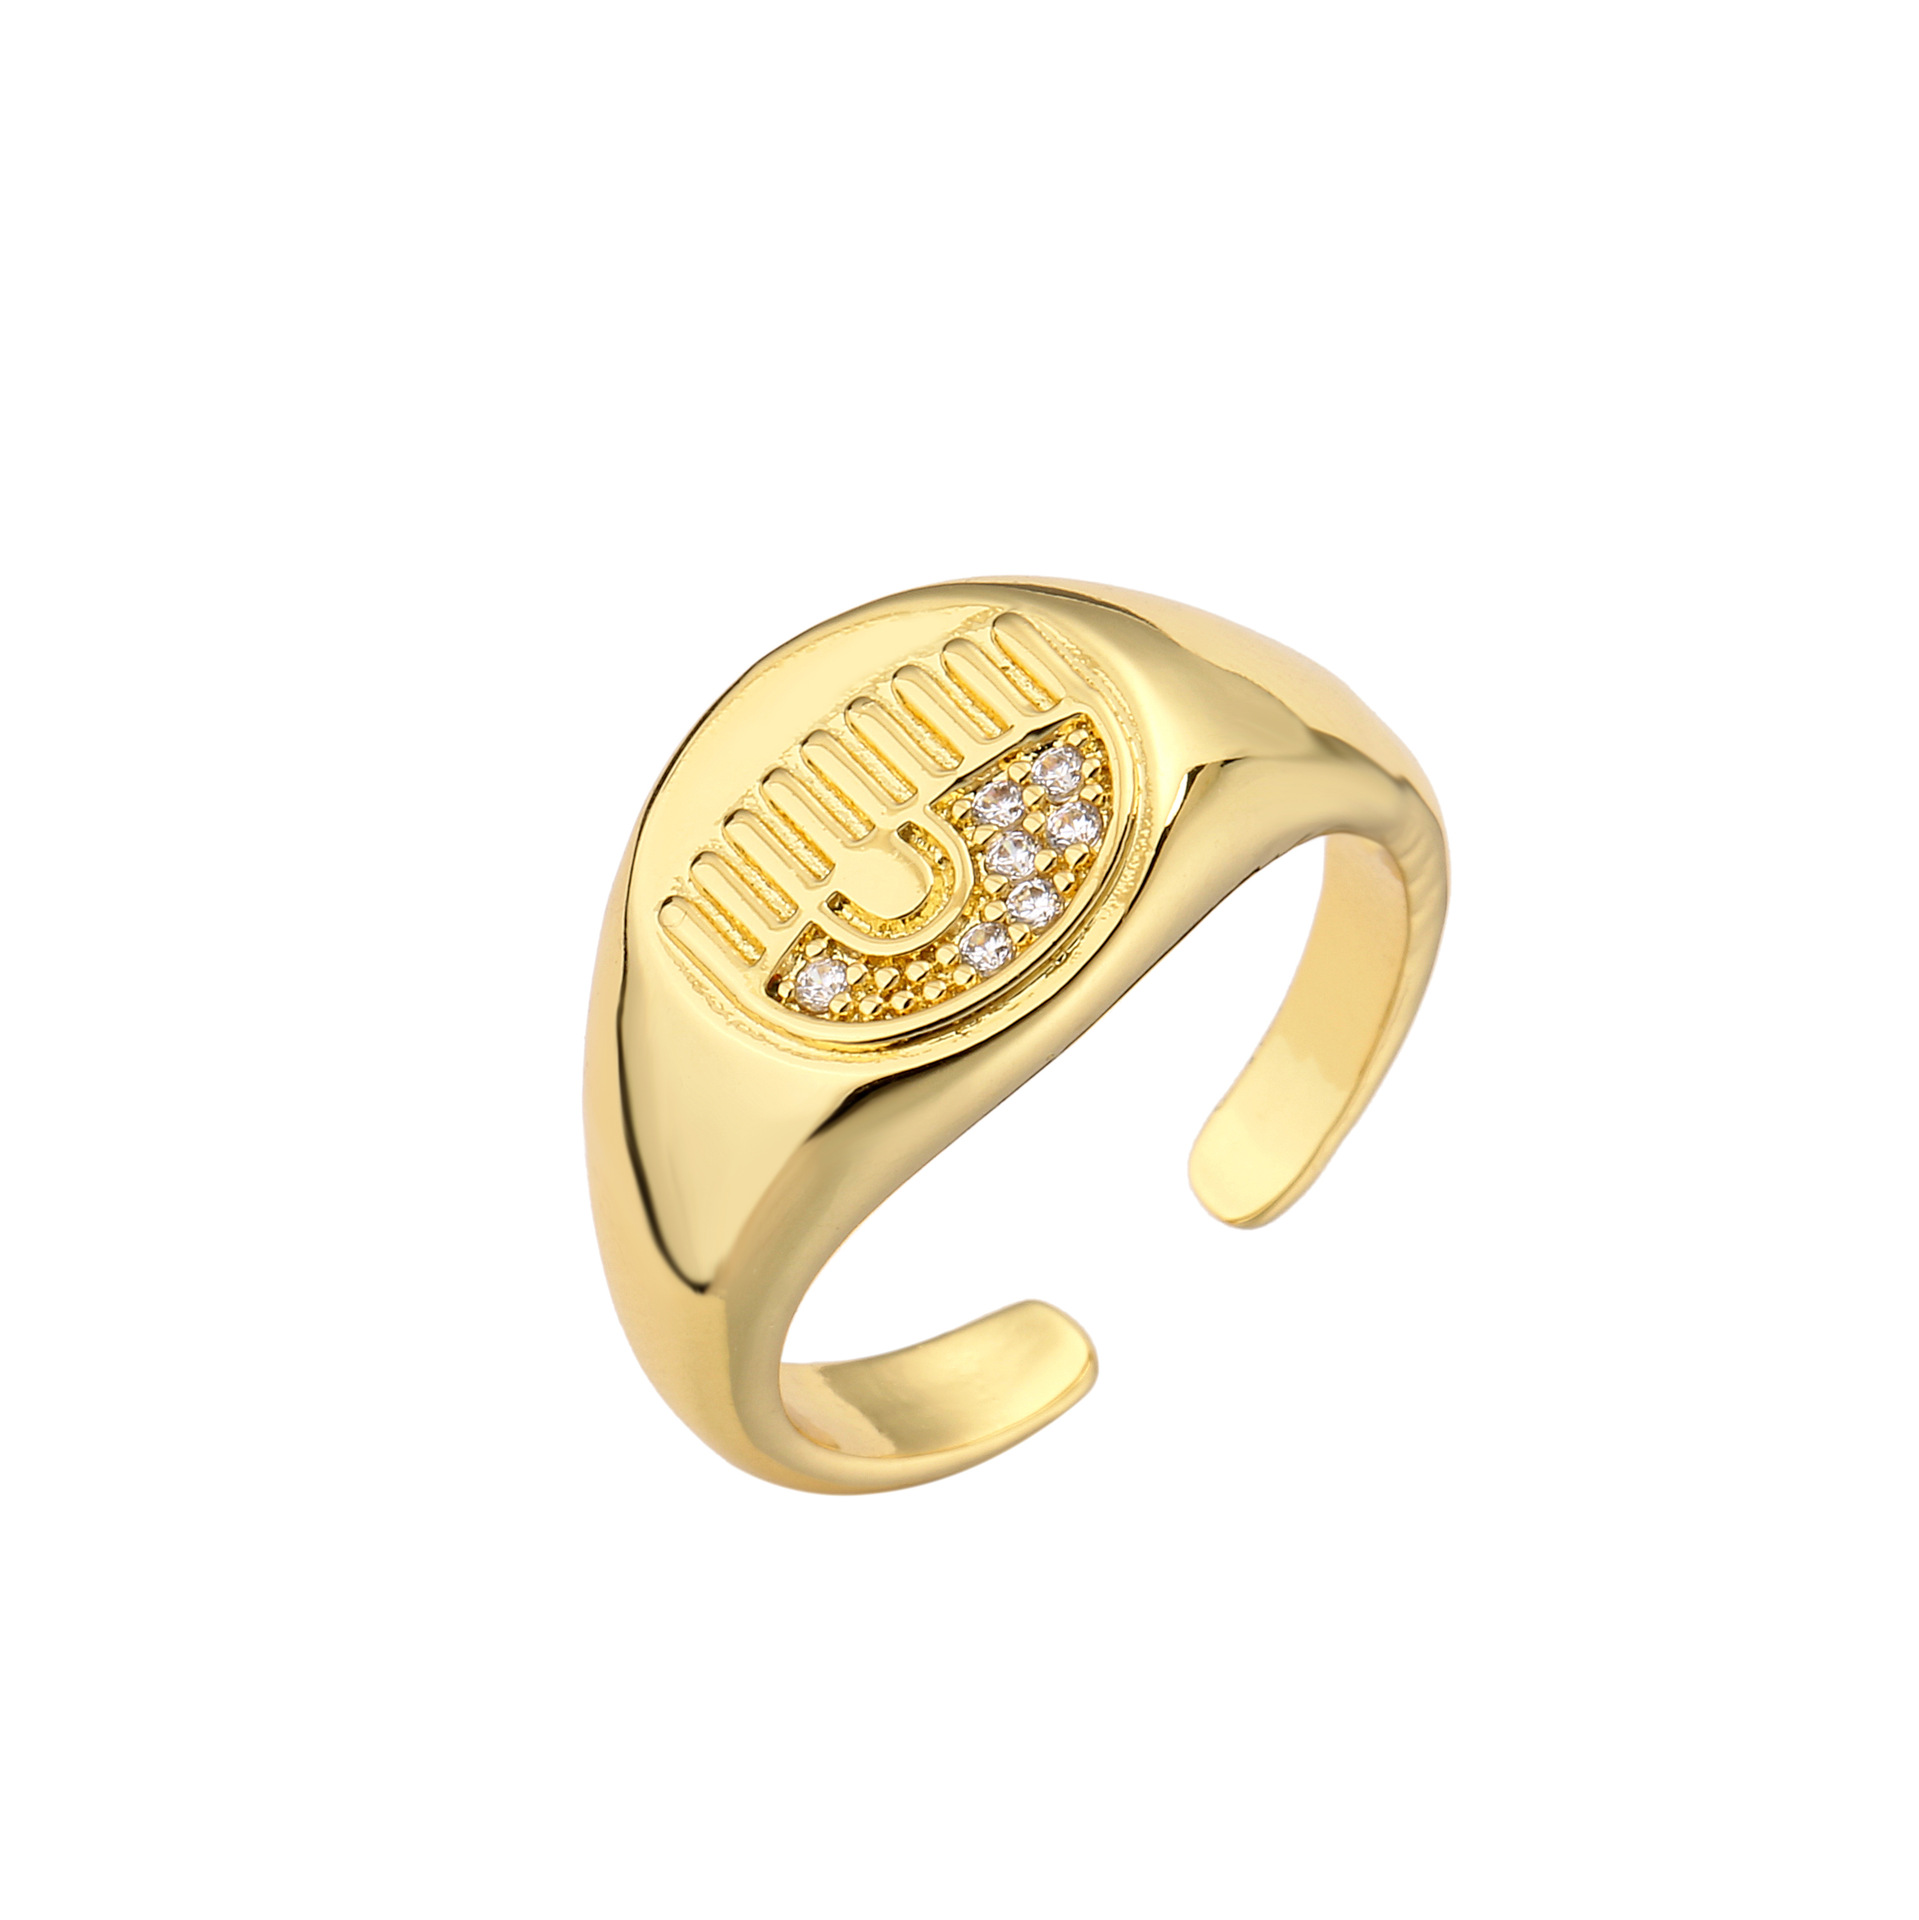 3:Gold Ring 1 piece